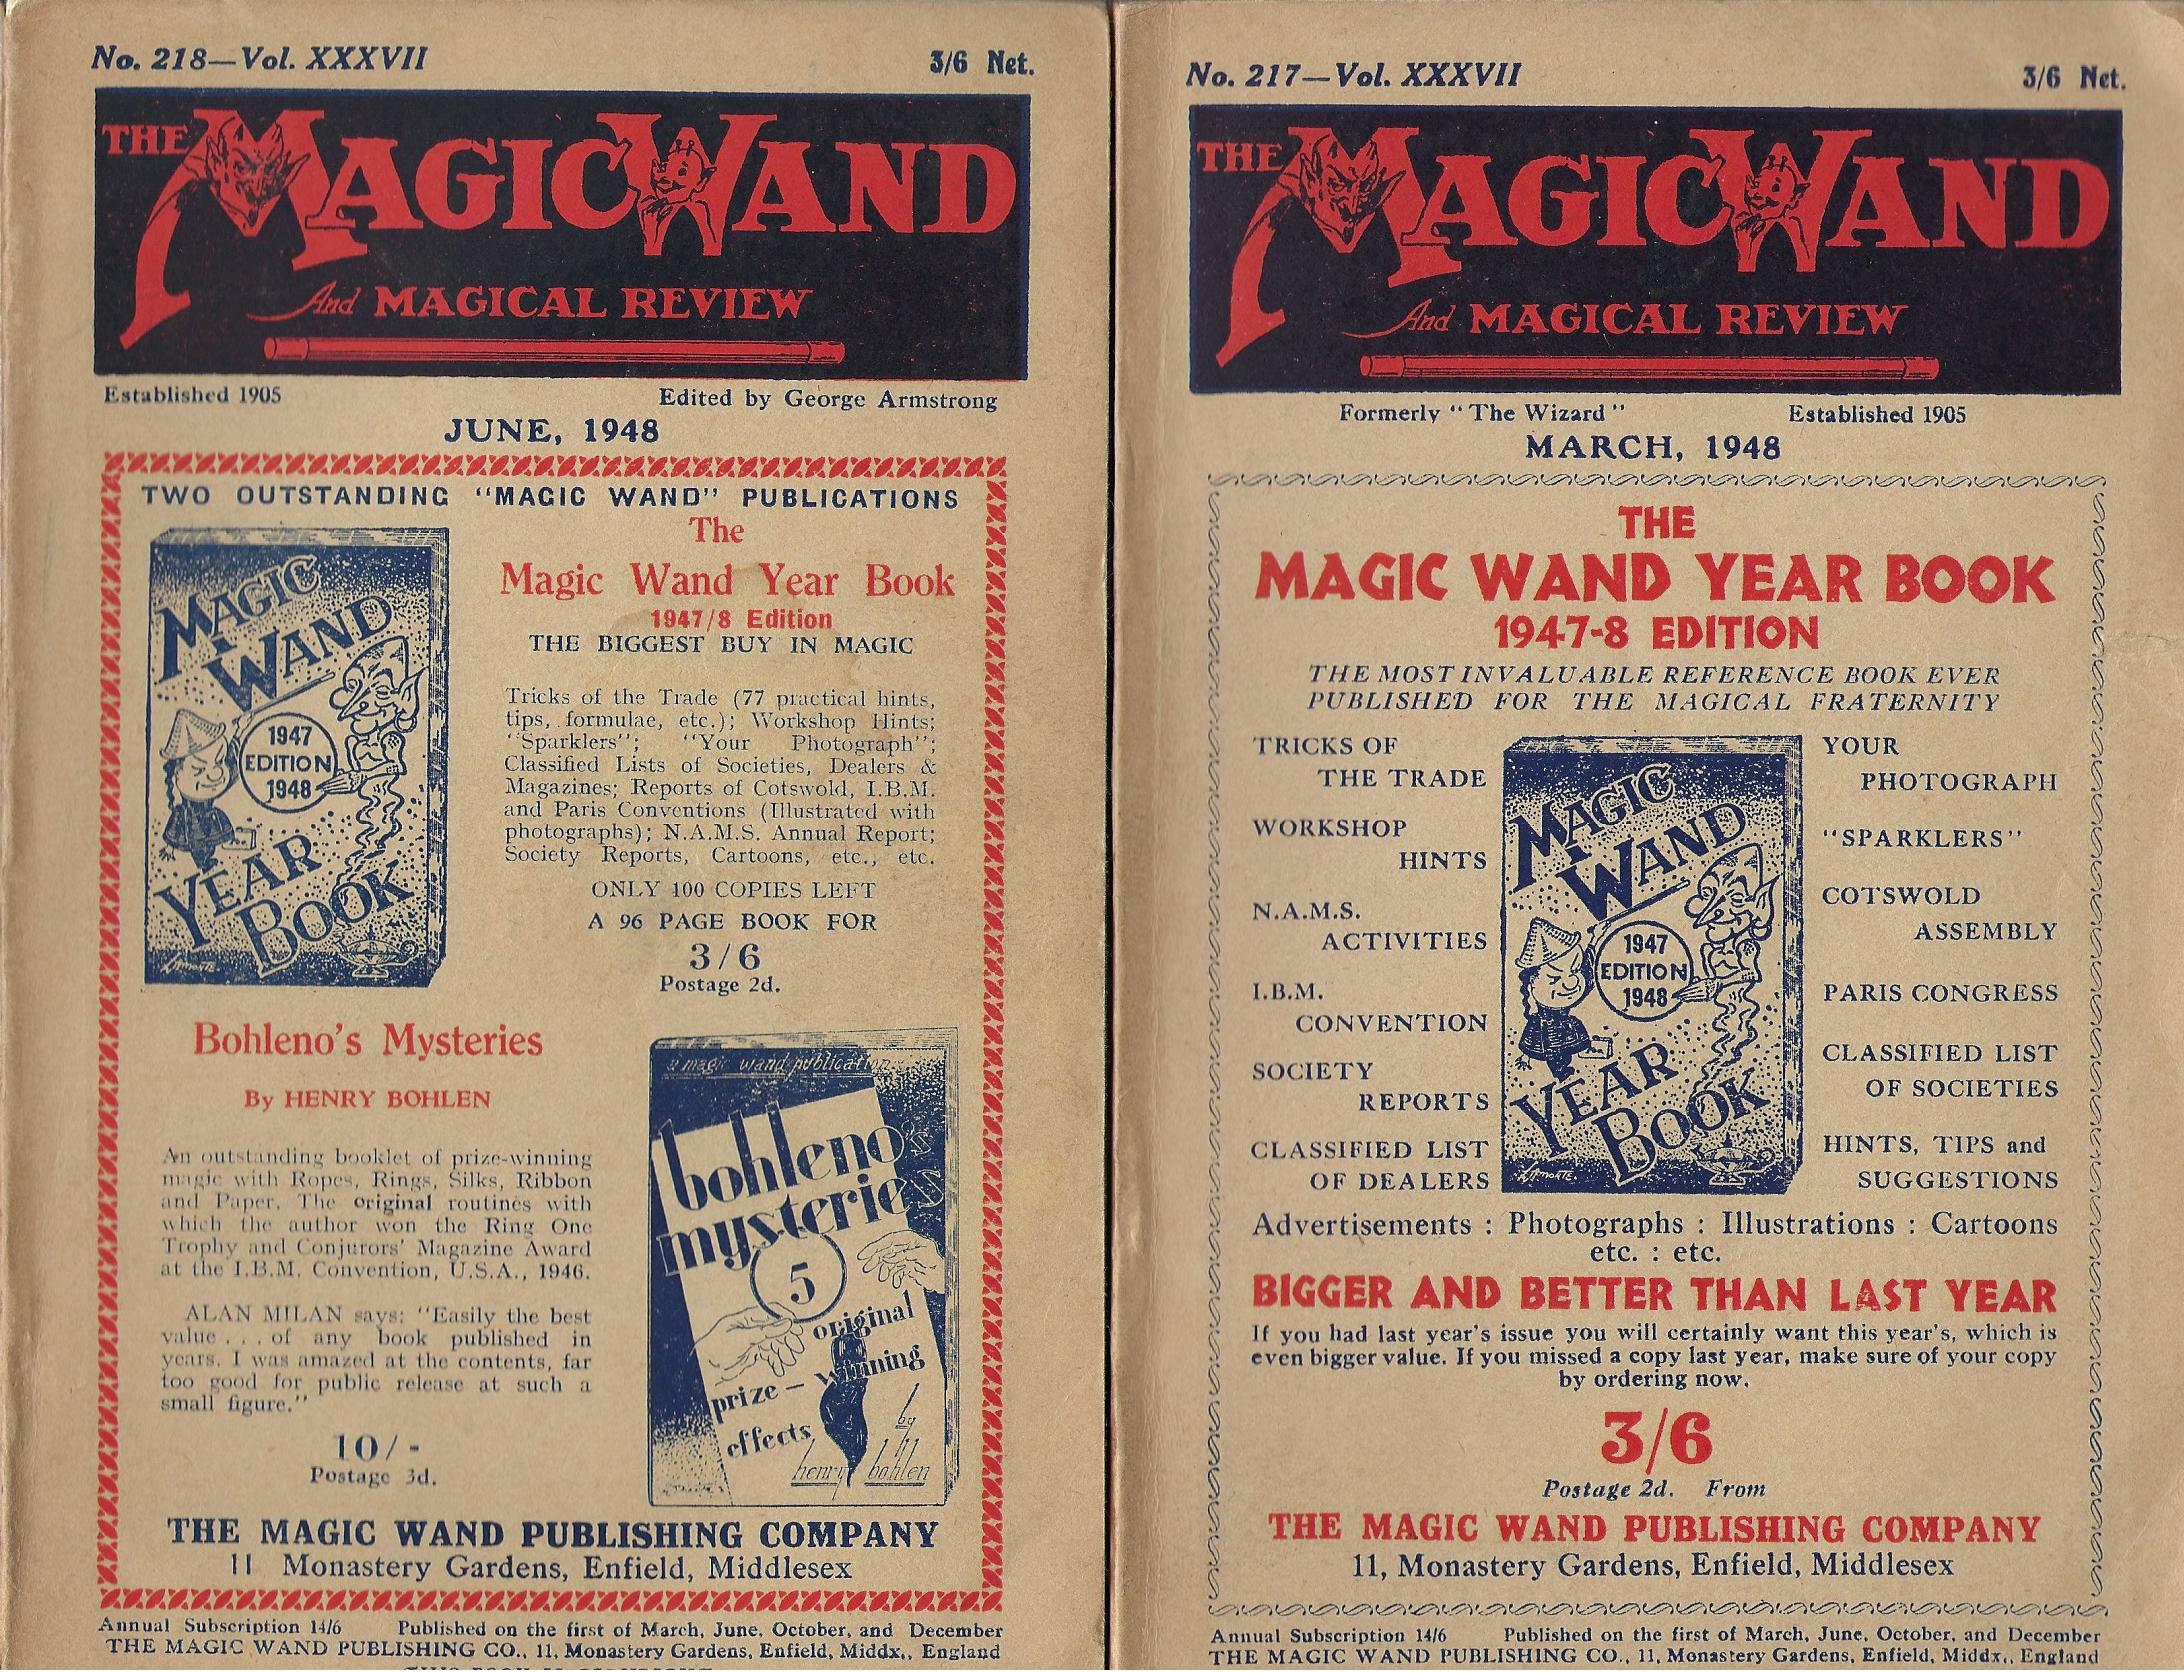 Image for The Magic Wand and Magical Review No. 217, 218, 219, 220 Vol. XXXVII